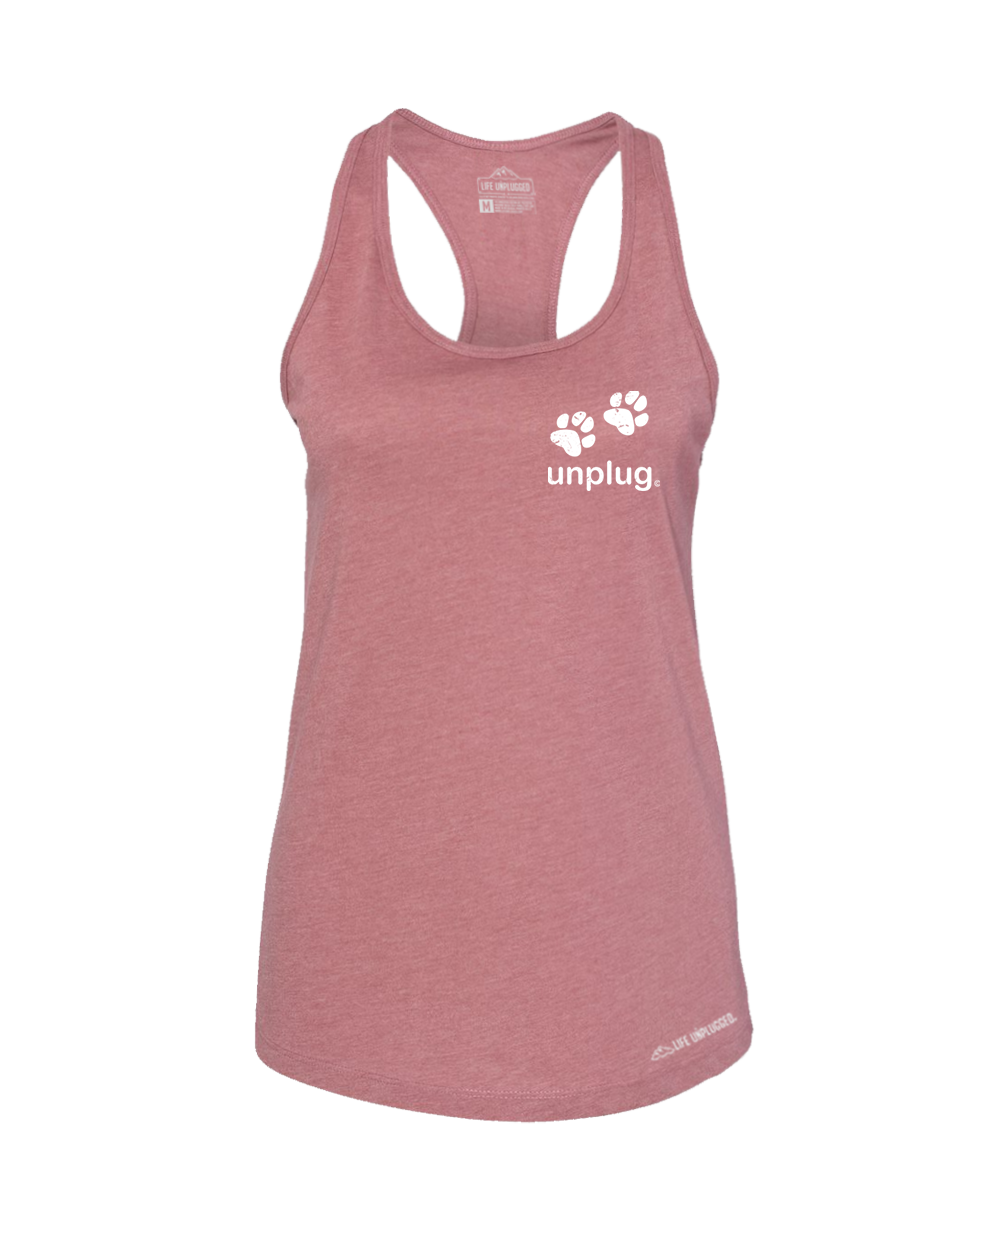 Paw Print Premium Women's Relaxed Fit Racerback Tank Top - Life Unplugged